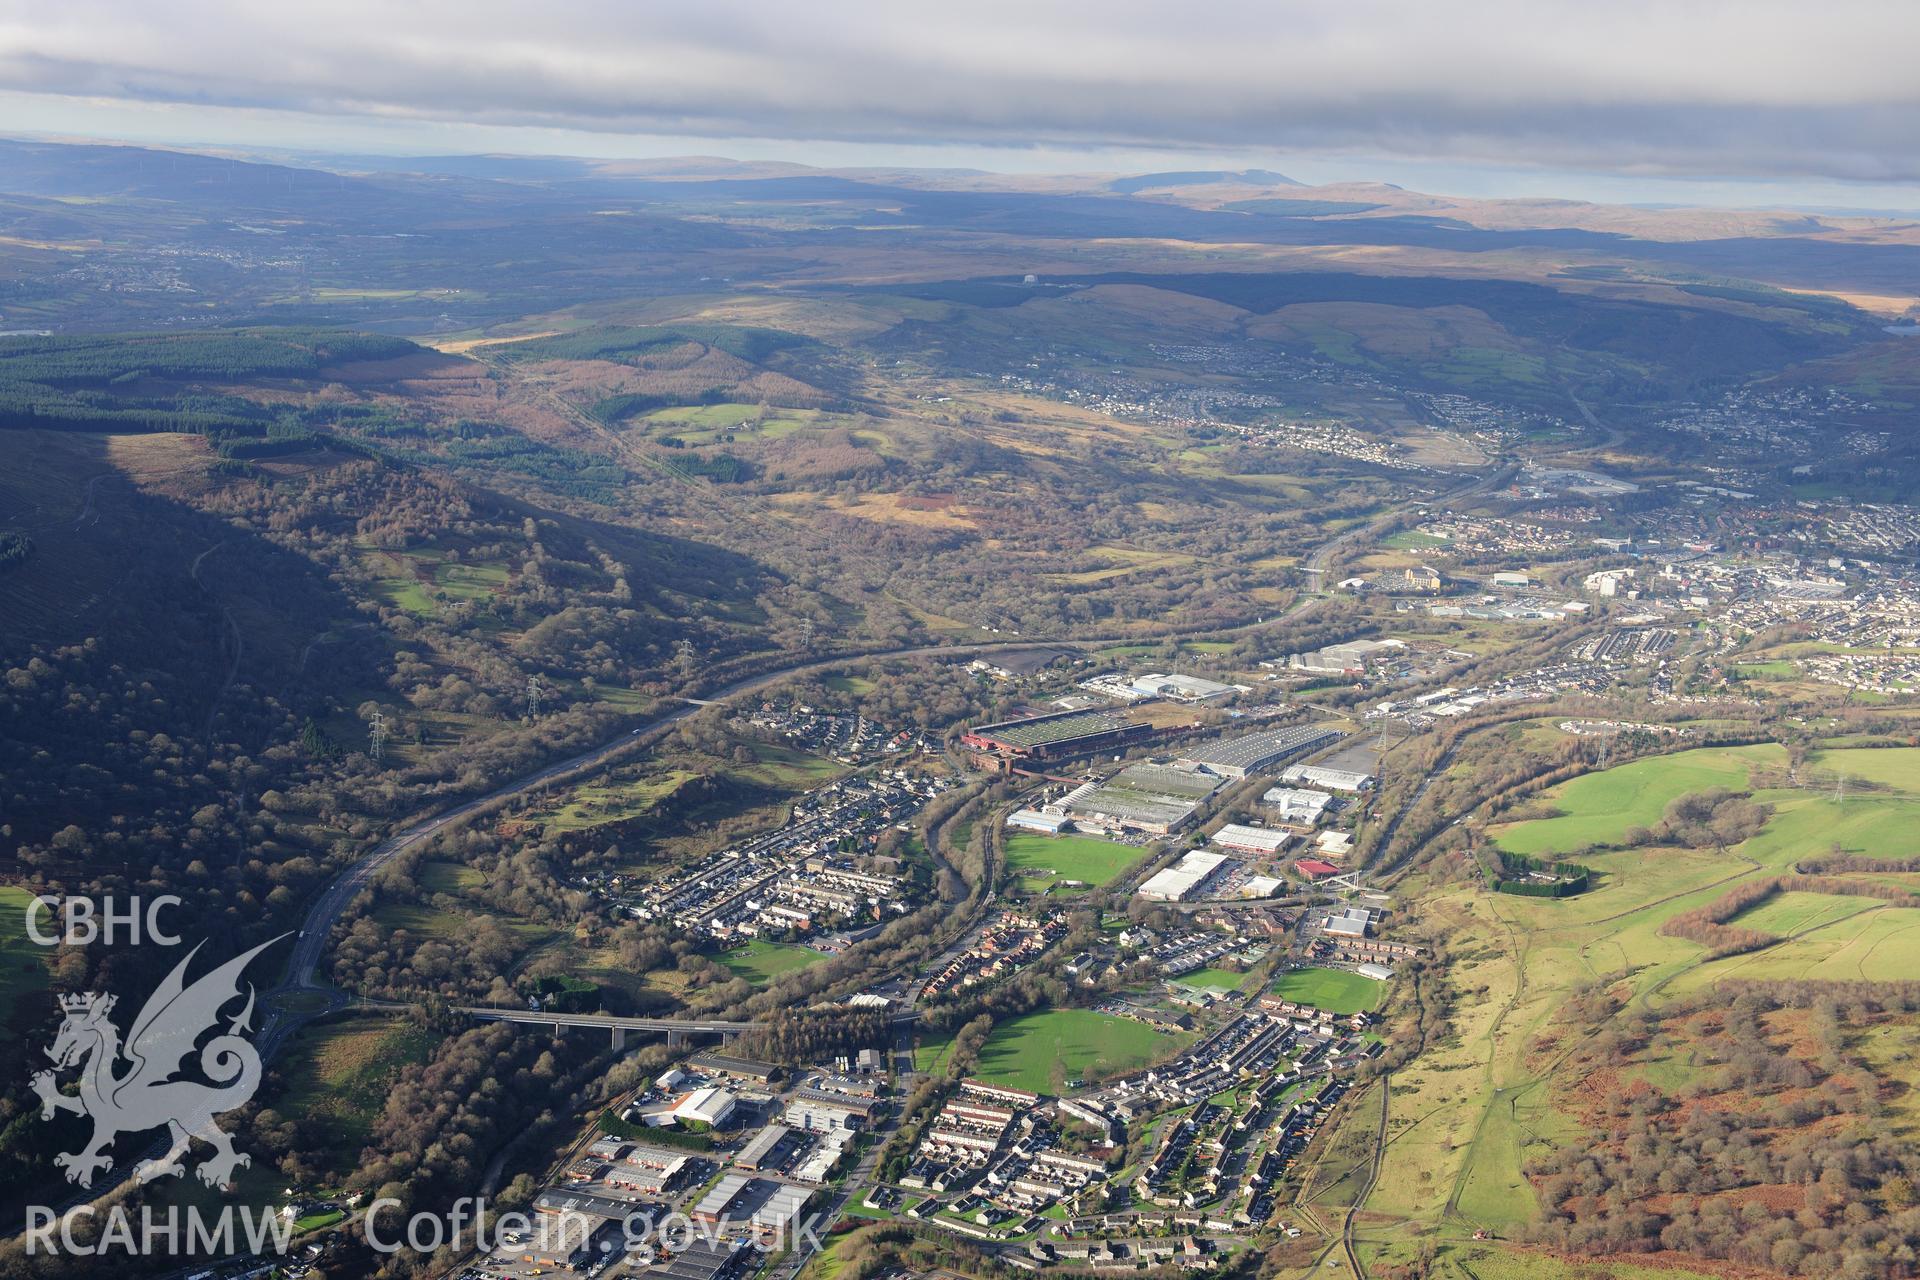 RCAHMW colour oblique photograph of Merthyr Tydfil, townscape from south-east. Taken by Toby Driver on 28/11/2012.